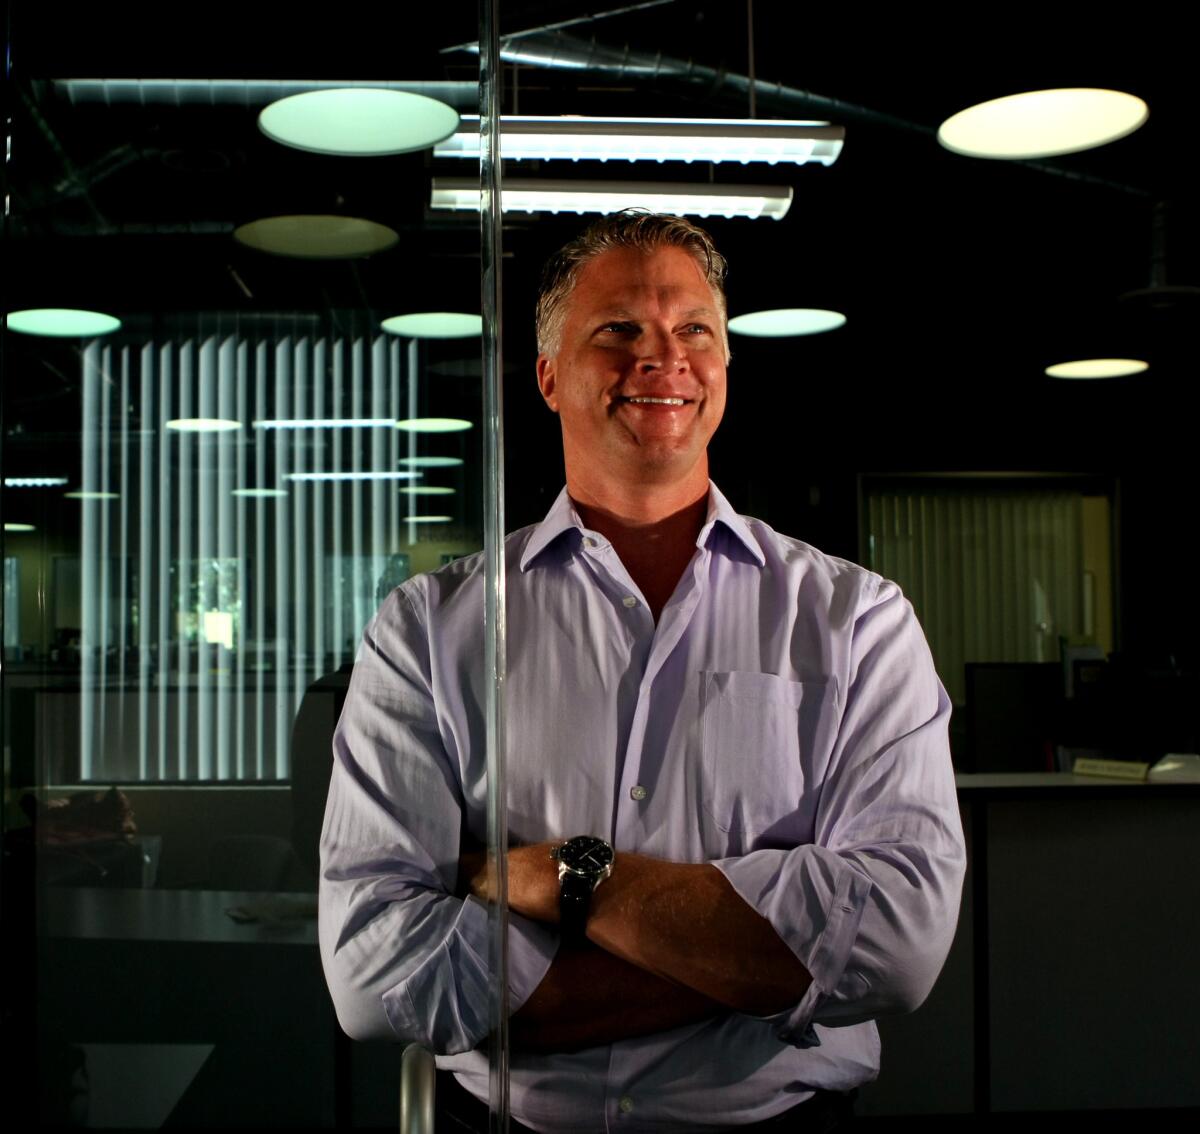 Keith Leonard, chief executive of Kythera Biopharmaceuticals Inc., stands inside the company's headquarters in 2013.